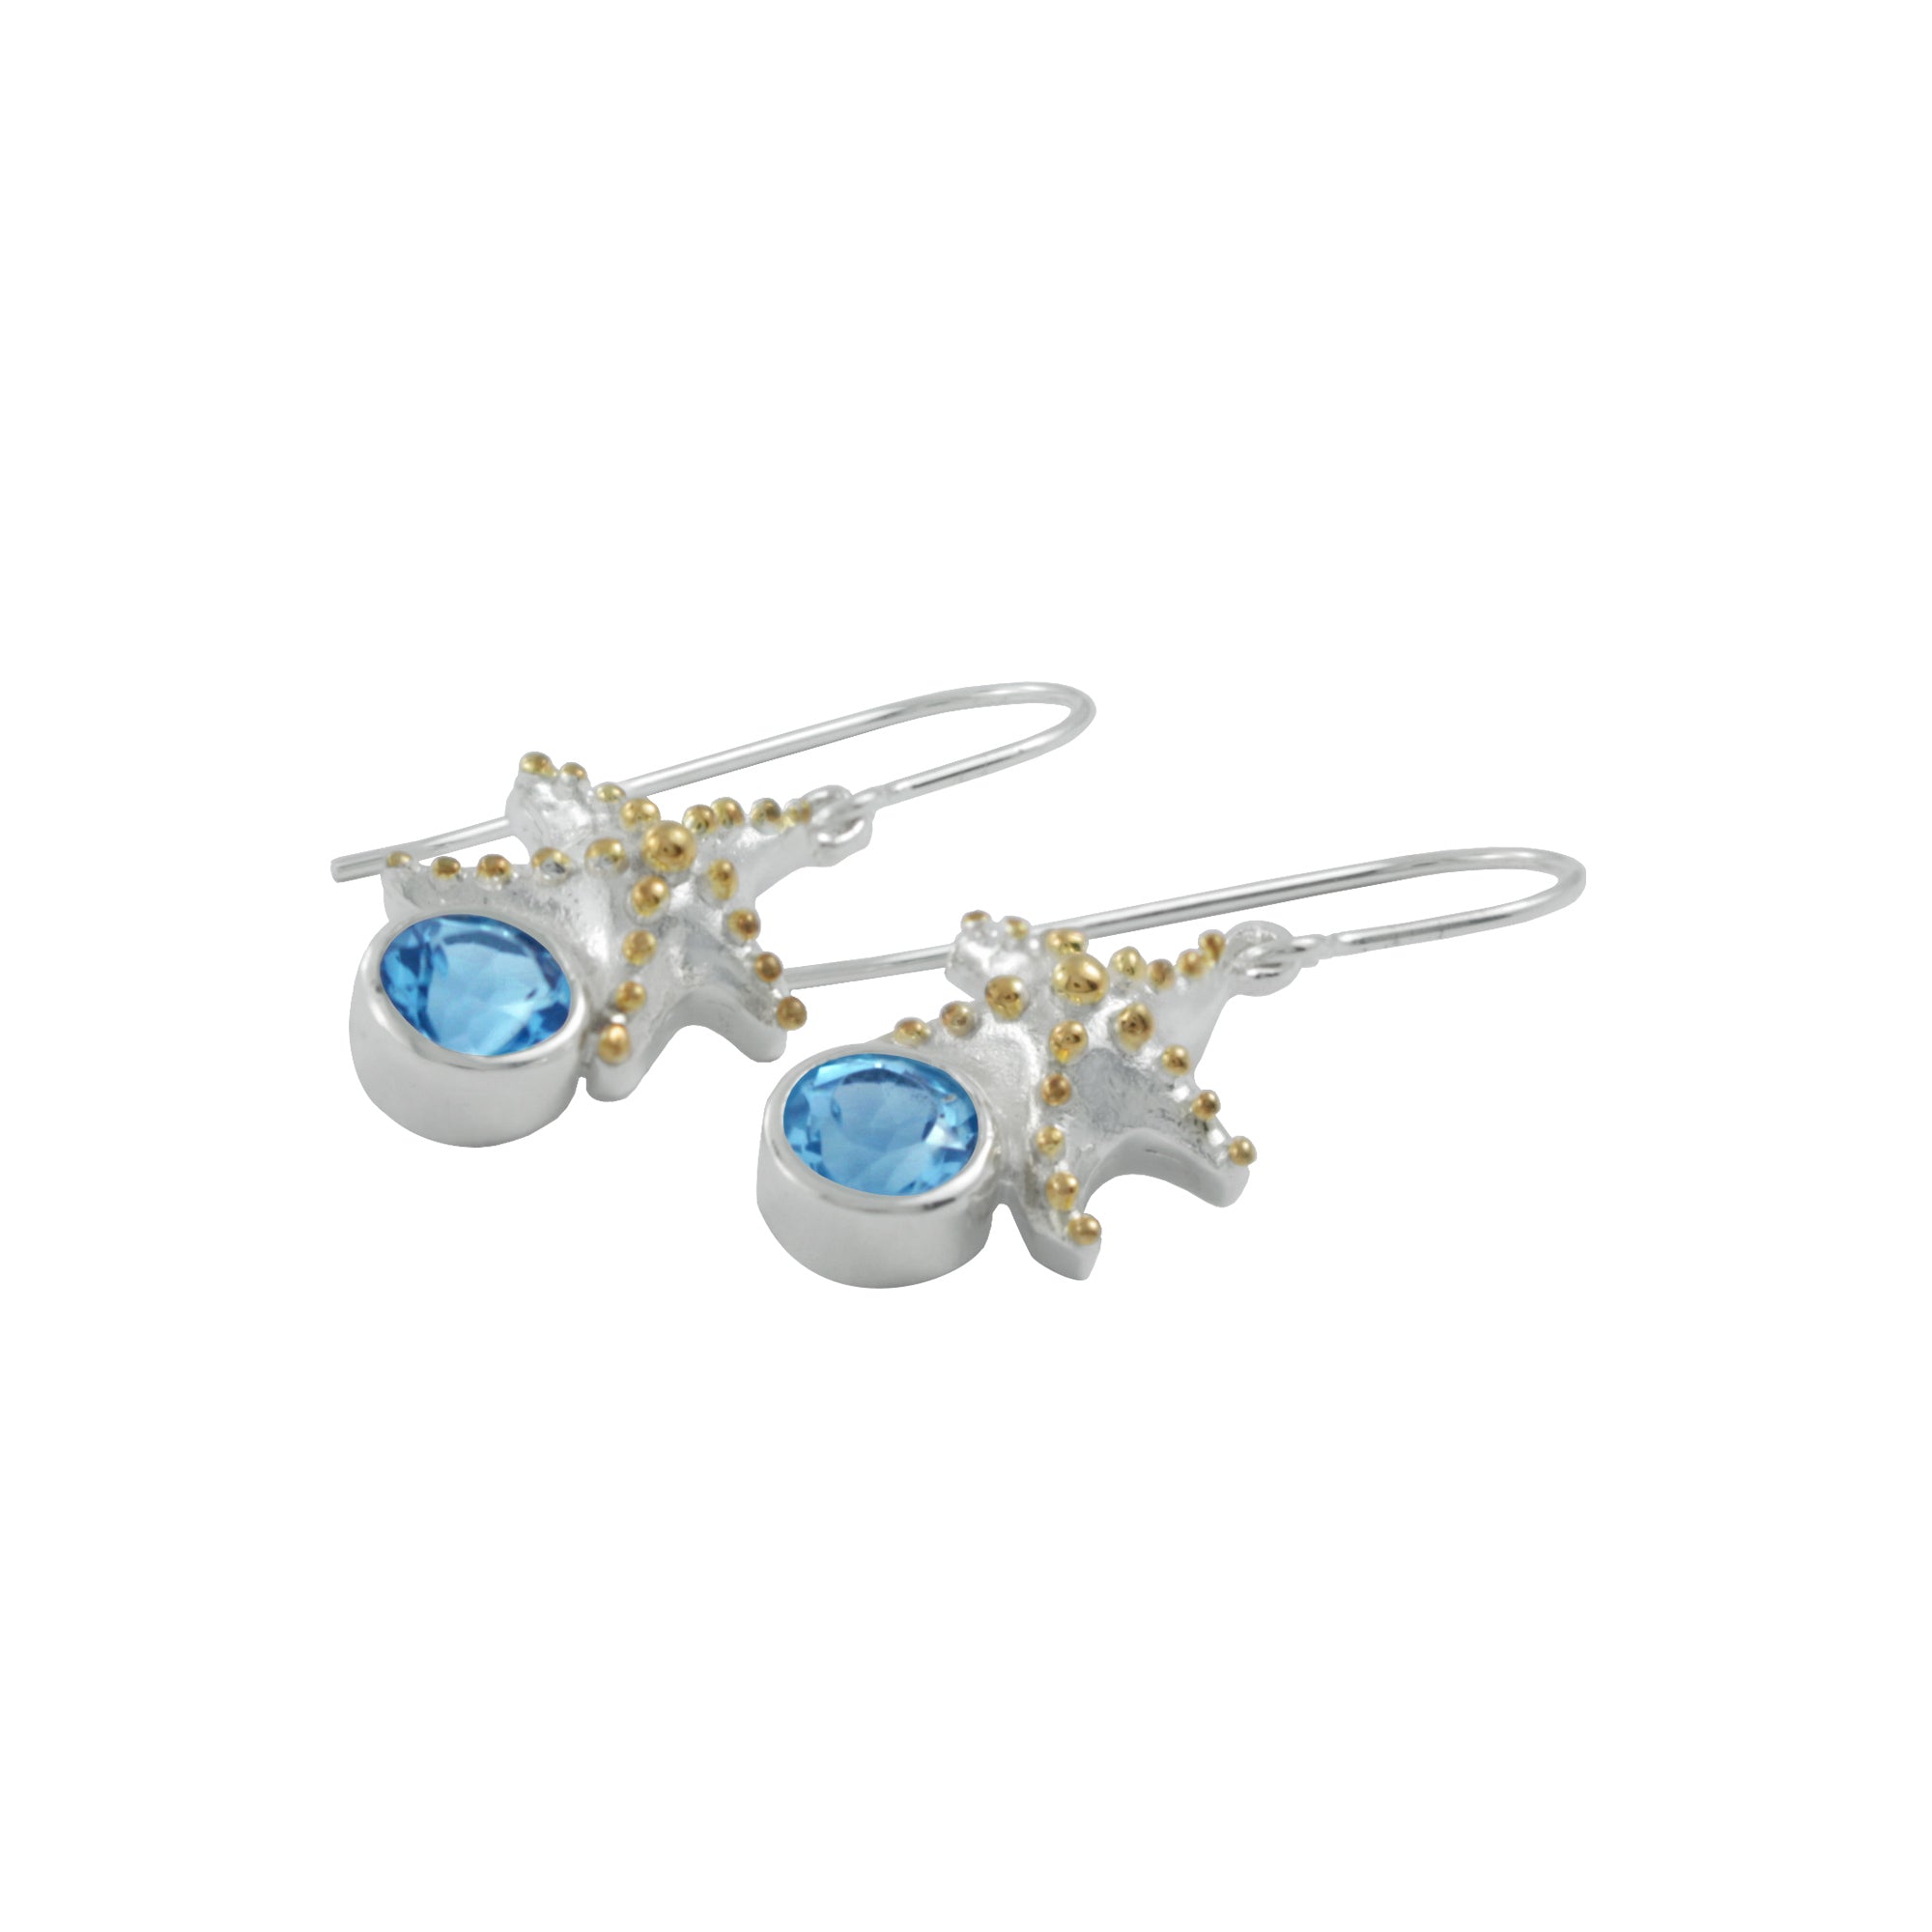 Silver Earring With Star Component & Blue Topaz Round Facet